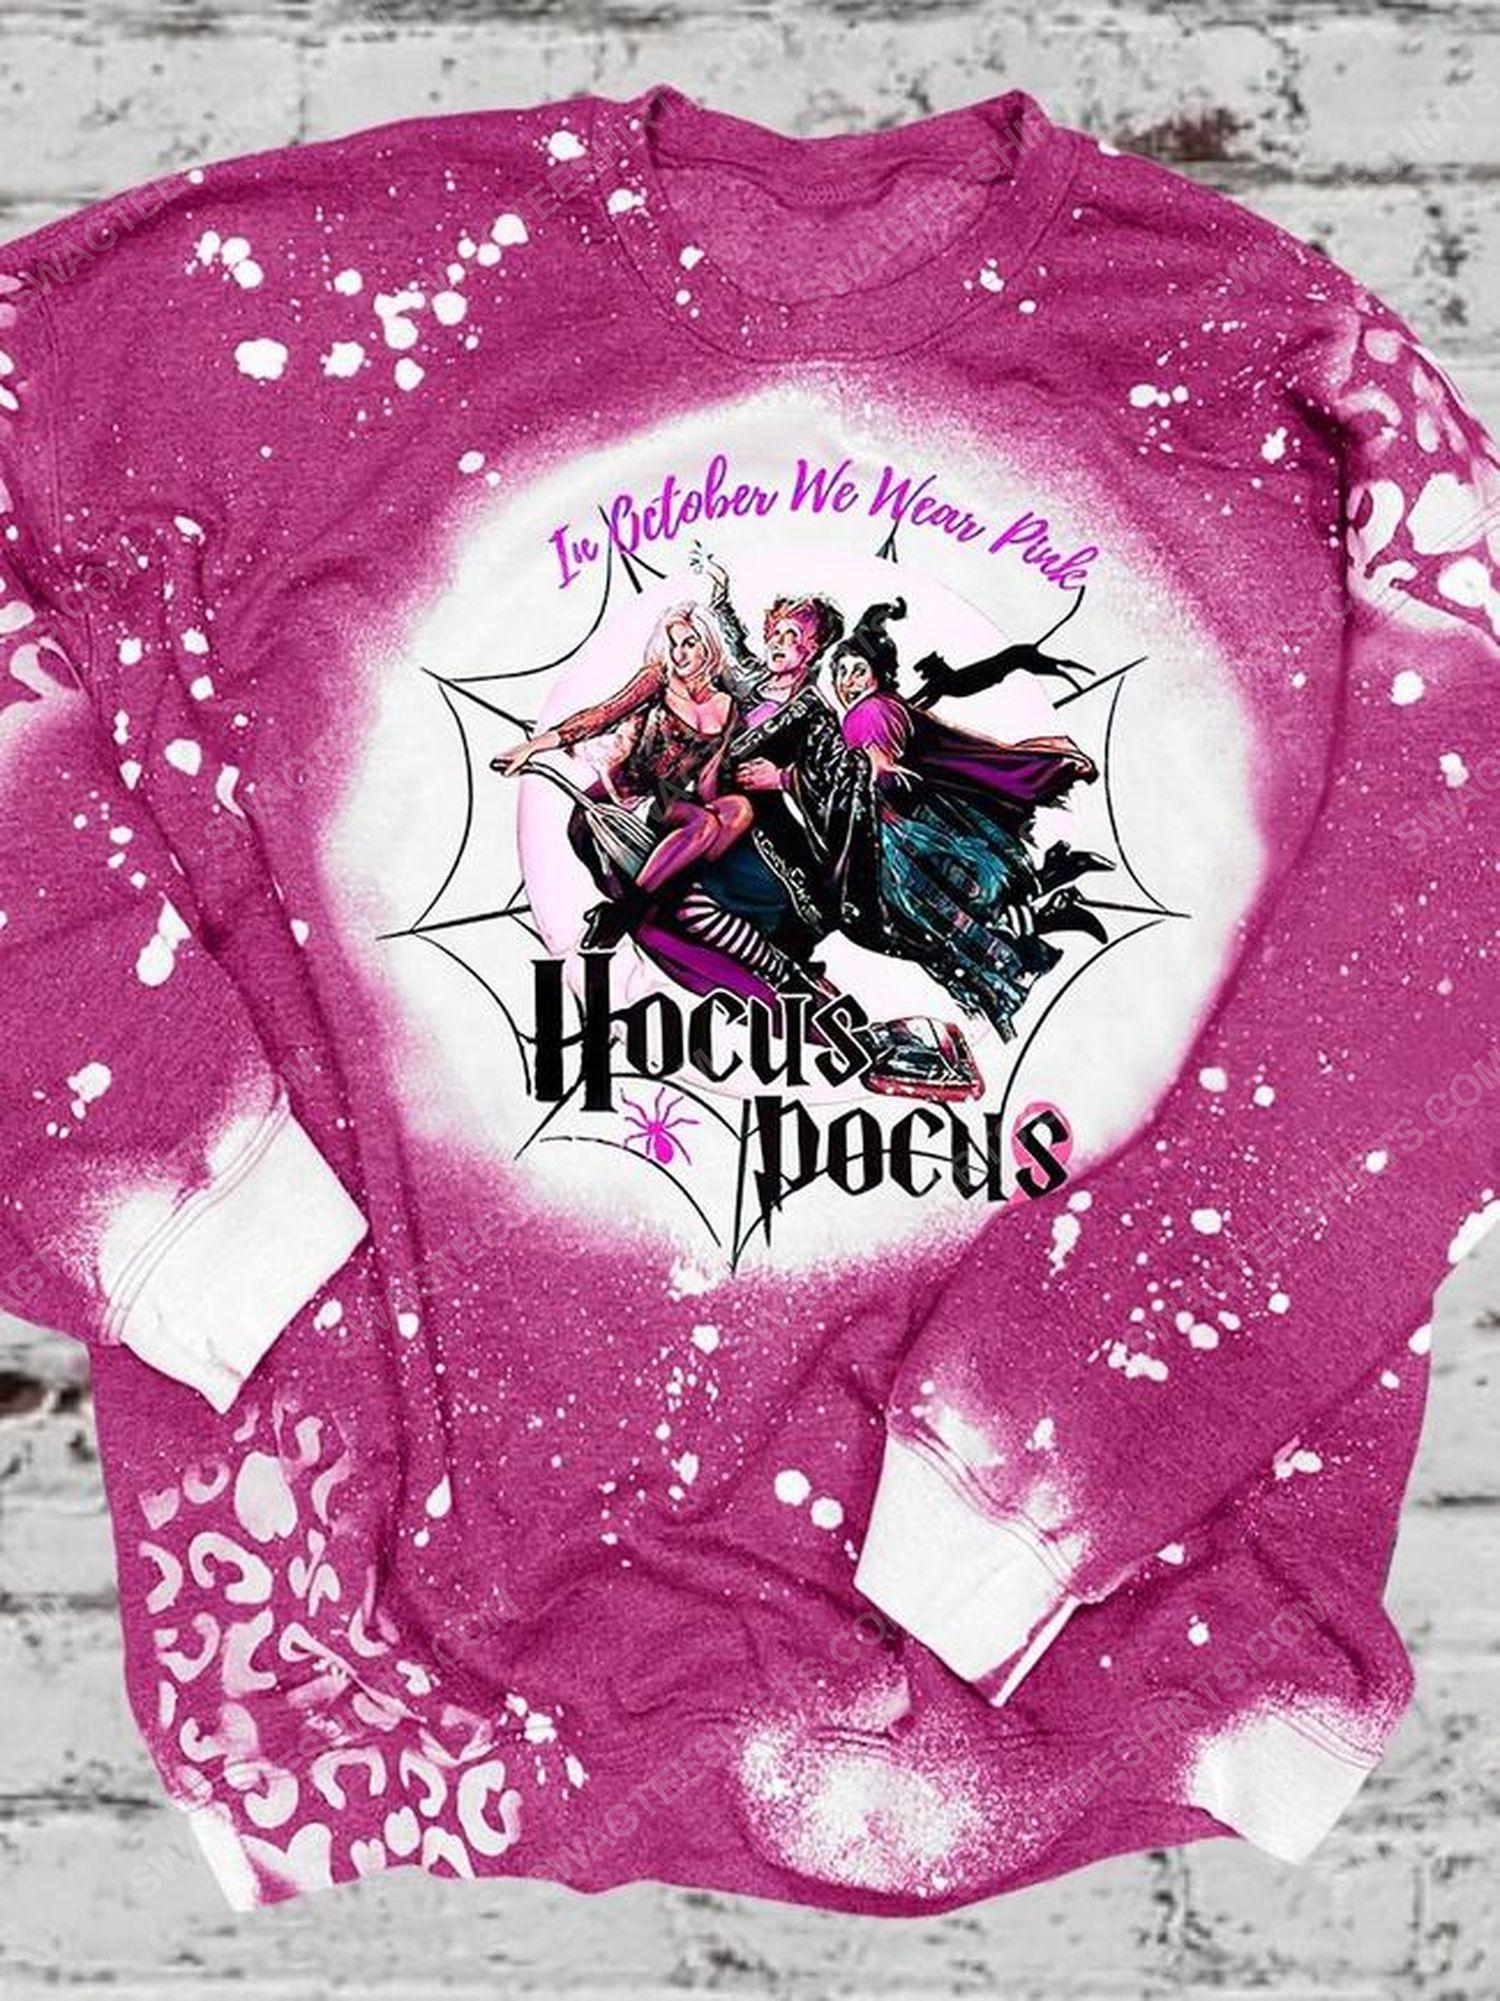 Breast cancer in october we wear pink hocus pocus full print shirt 1 - Copy (2)